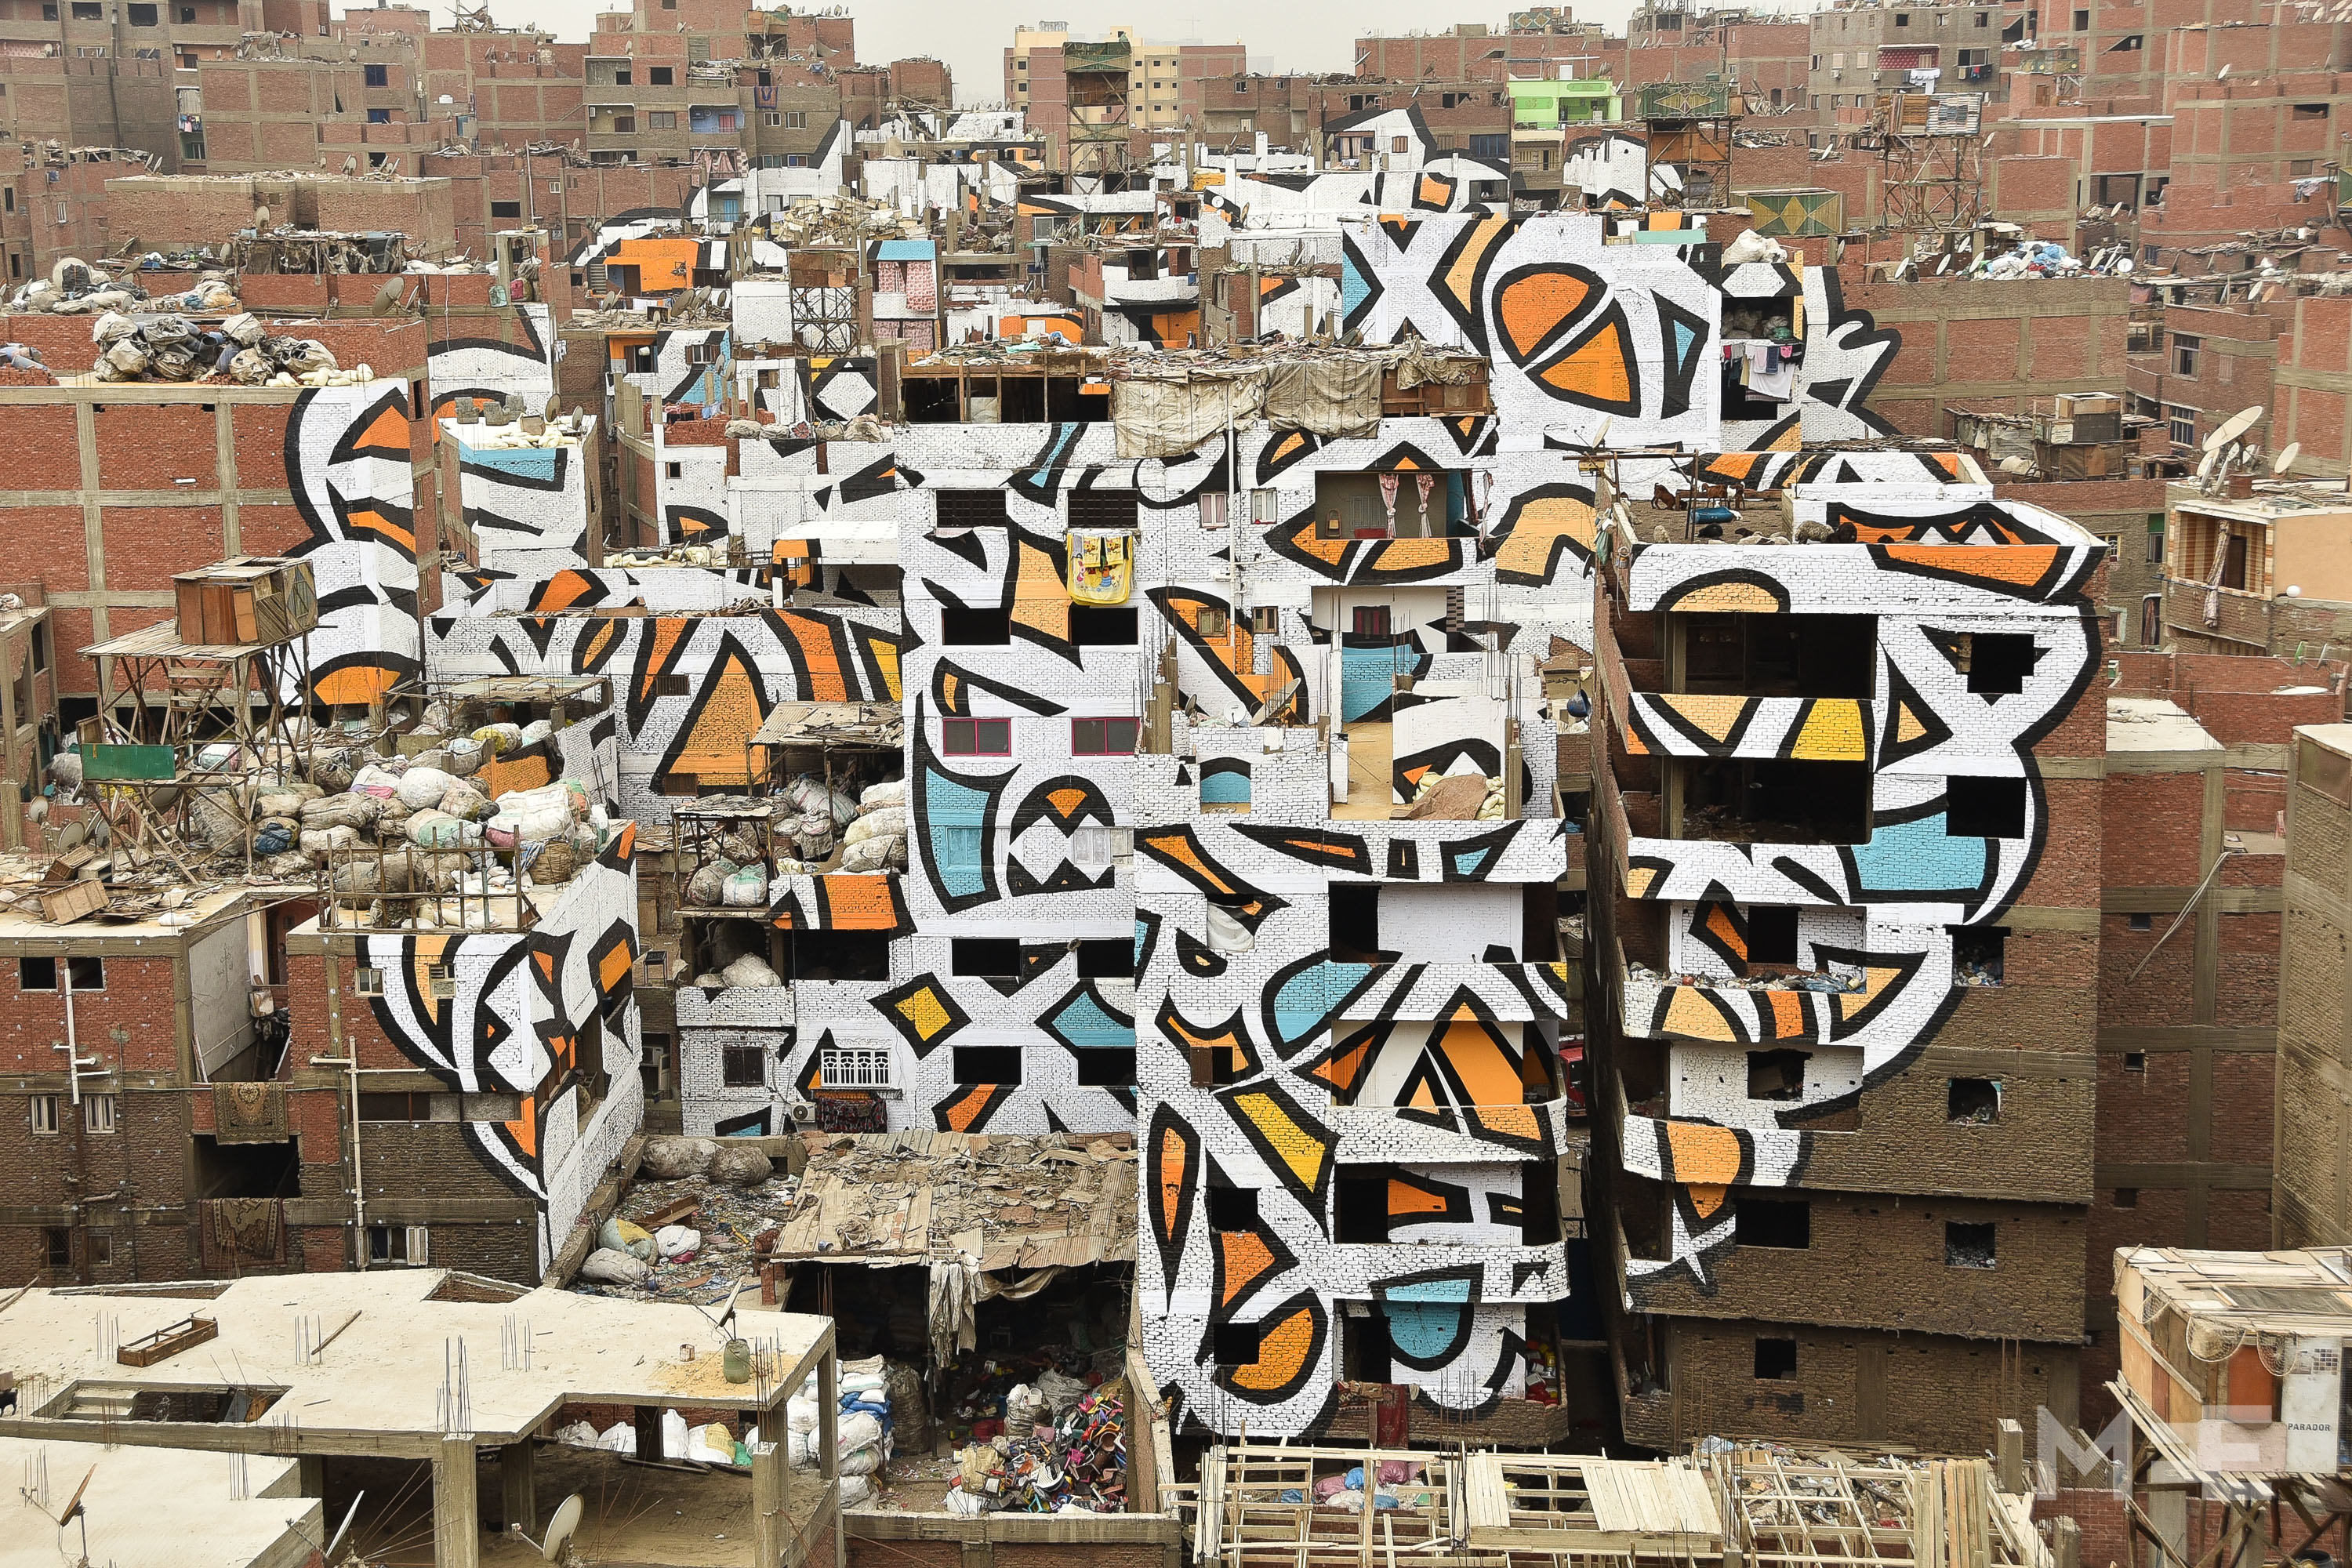 Giant mural brings sunlight to Cairo's garbage district | Middle East Eye